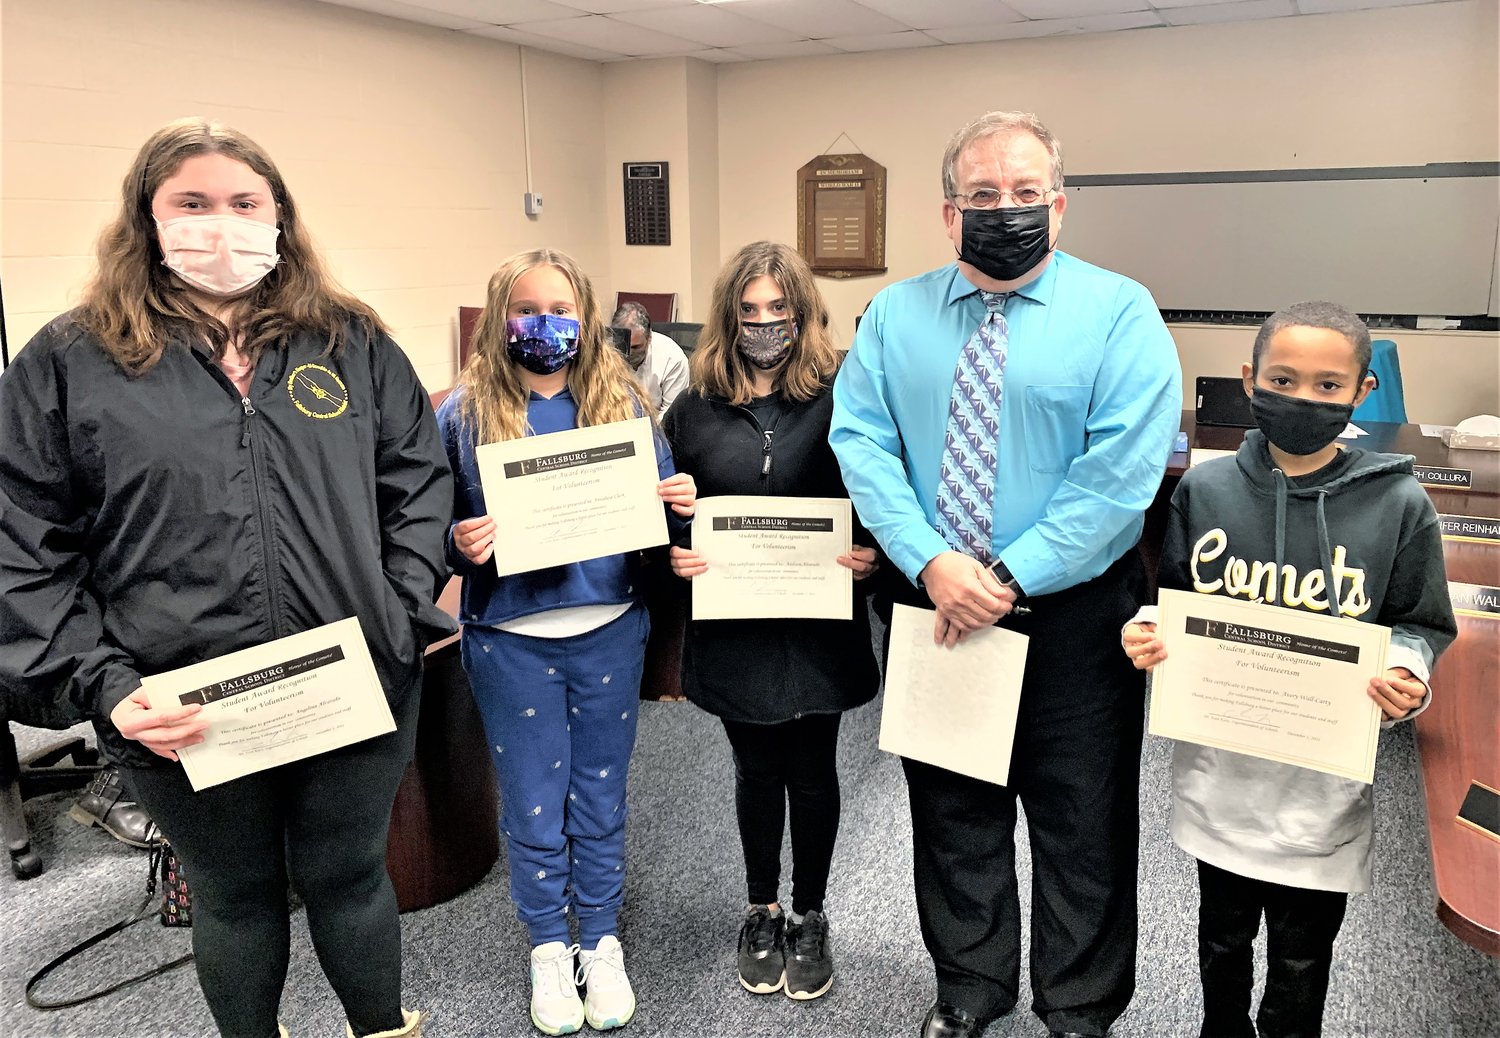 From left to right Angelina Alvarado, Annalise Clark, Addison Alvarado, Board of Education member Mike Weiner, who presented the certificates, and Avery Wall-Carty. Jayden Johnson was unable to attend the ceremony and was given her certificate at a later date.